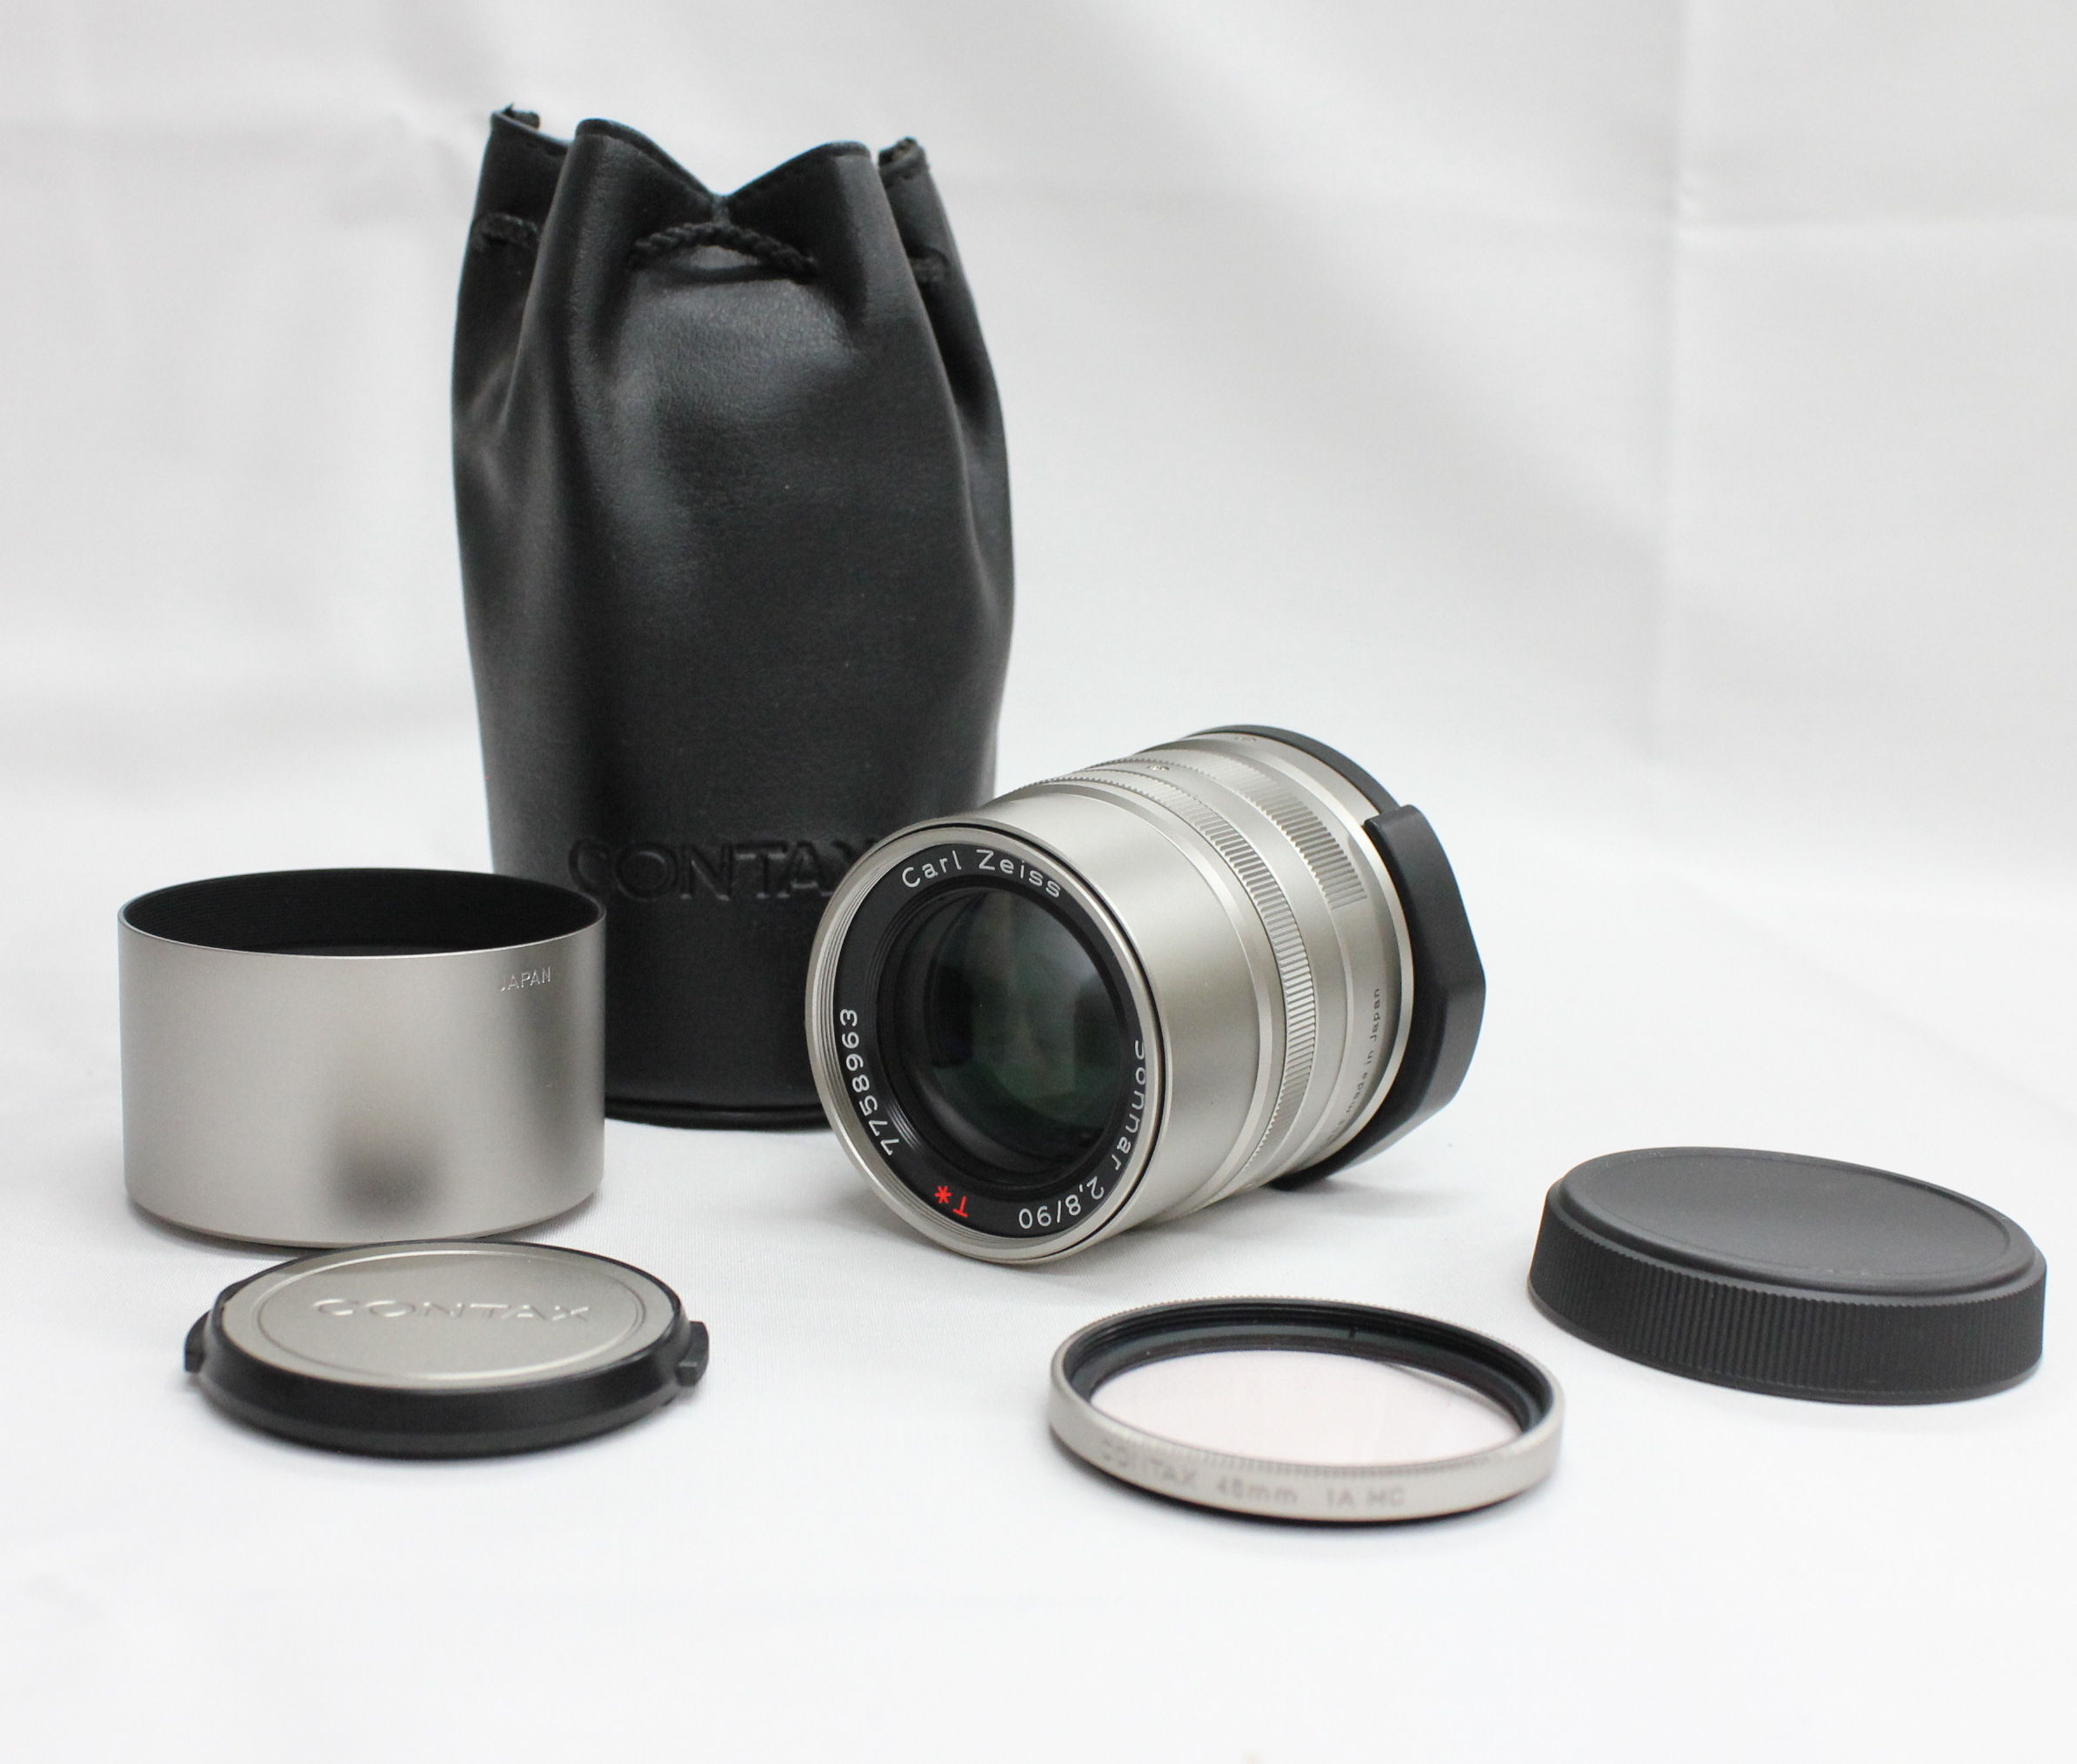  Contax Carl Zeiss Sonnar 90mm F/2.8 T* AF Lens with Hood/Filter/Case for G1 G2 from JAPAN Photo 0